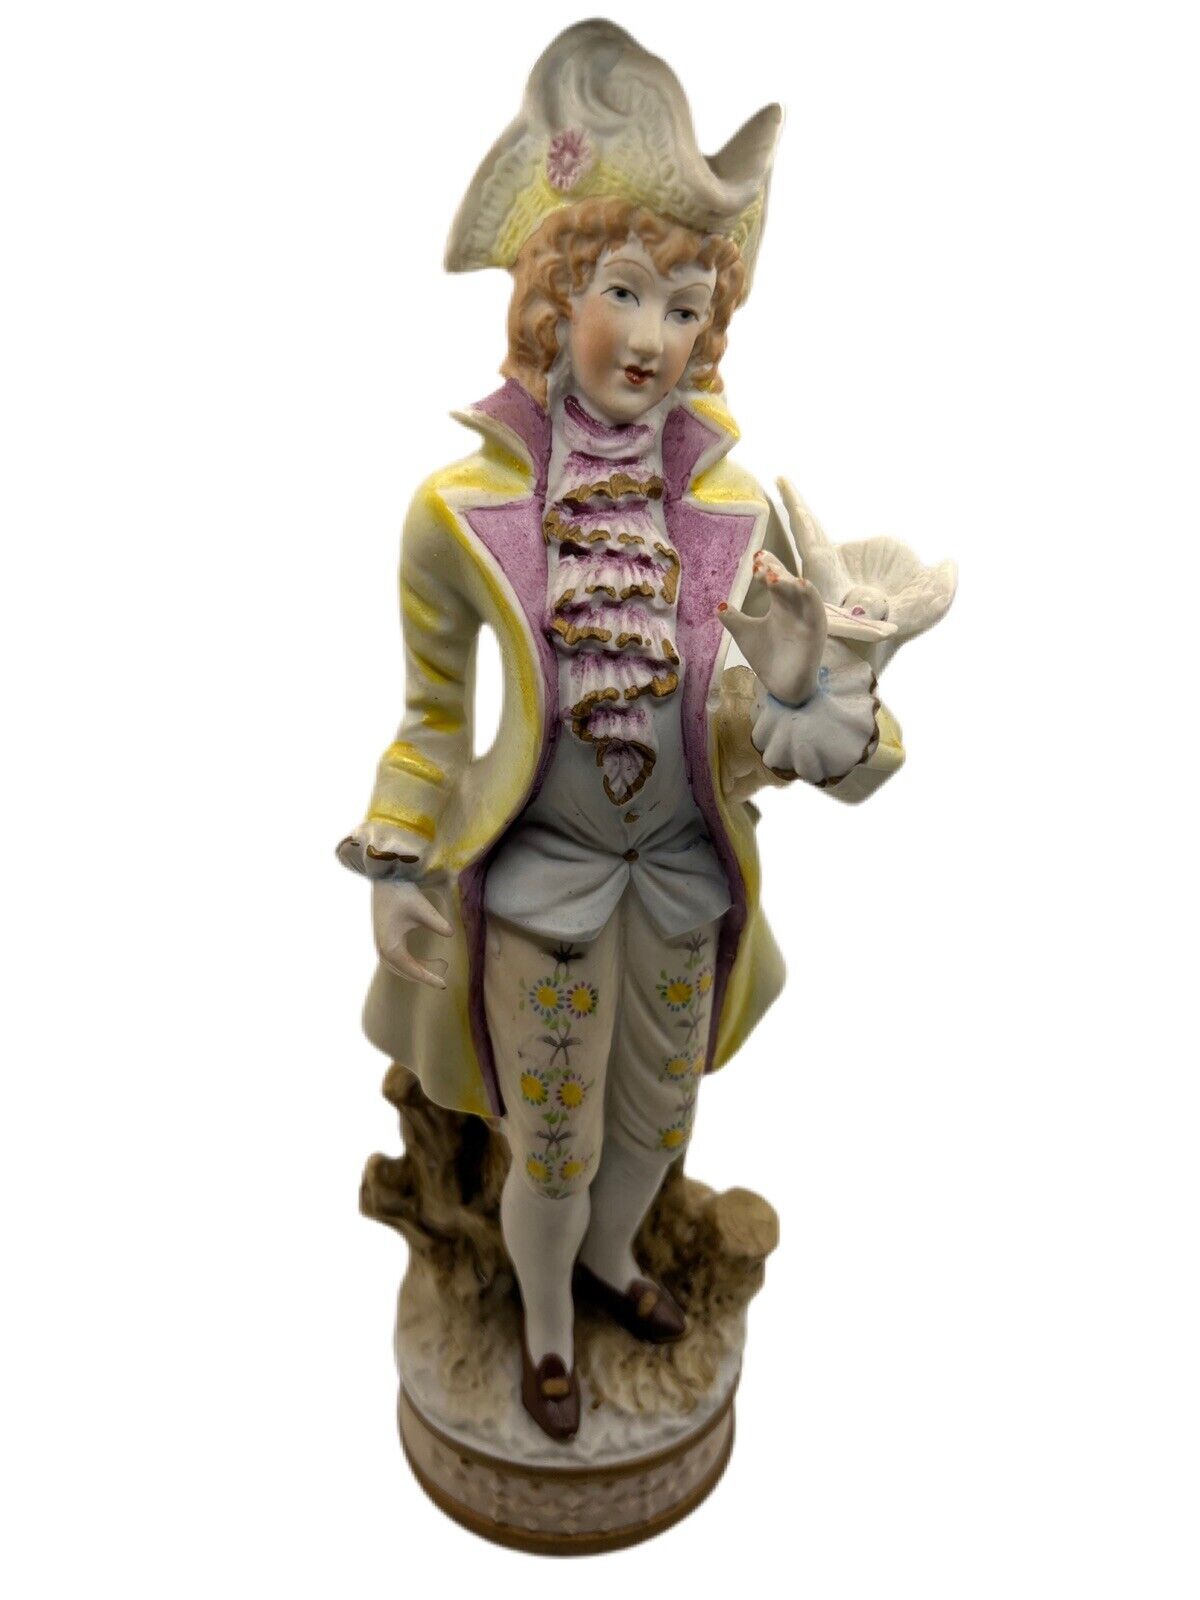 Vtg French Colonial Man Figurine With Bird Delivering Letter  Porcelain Bisque